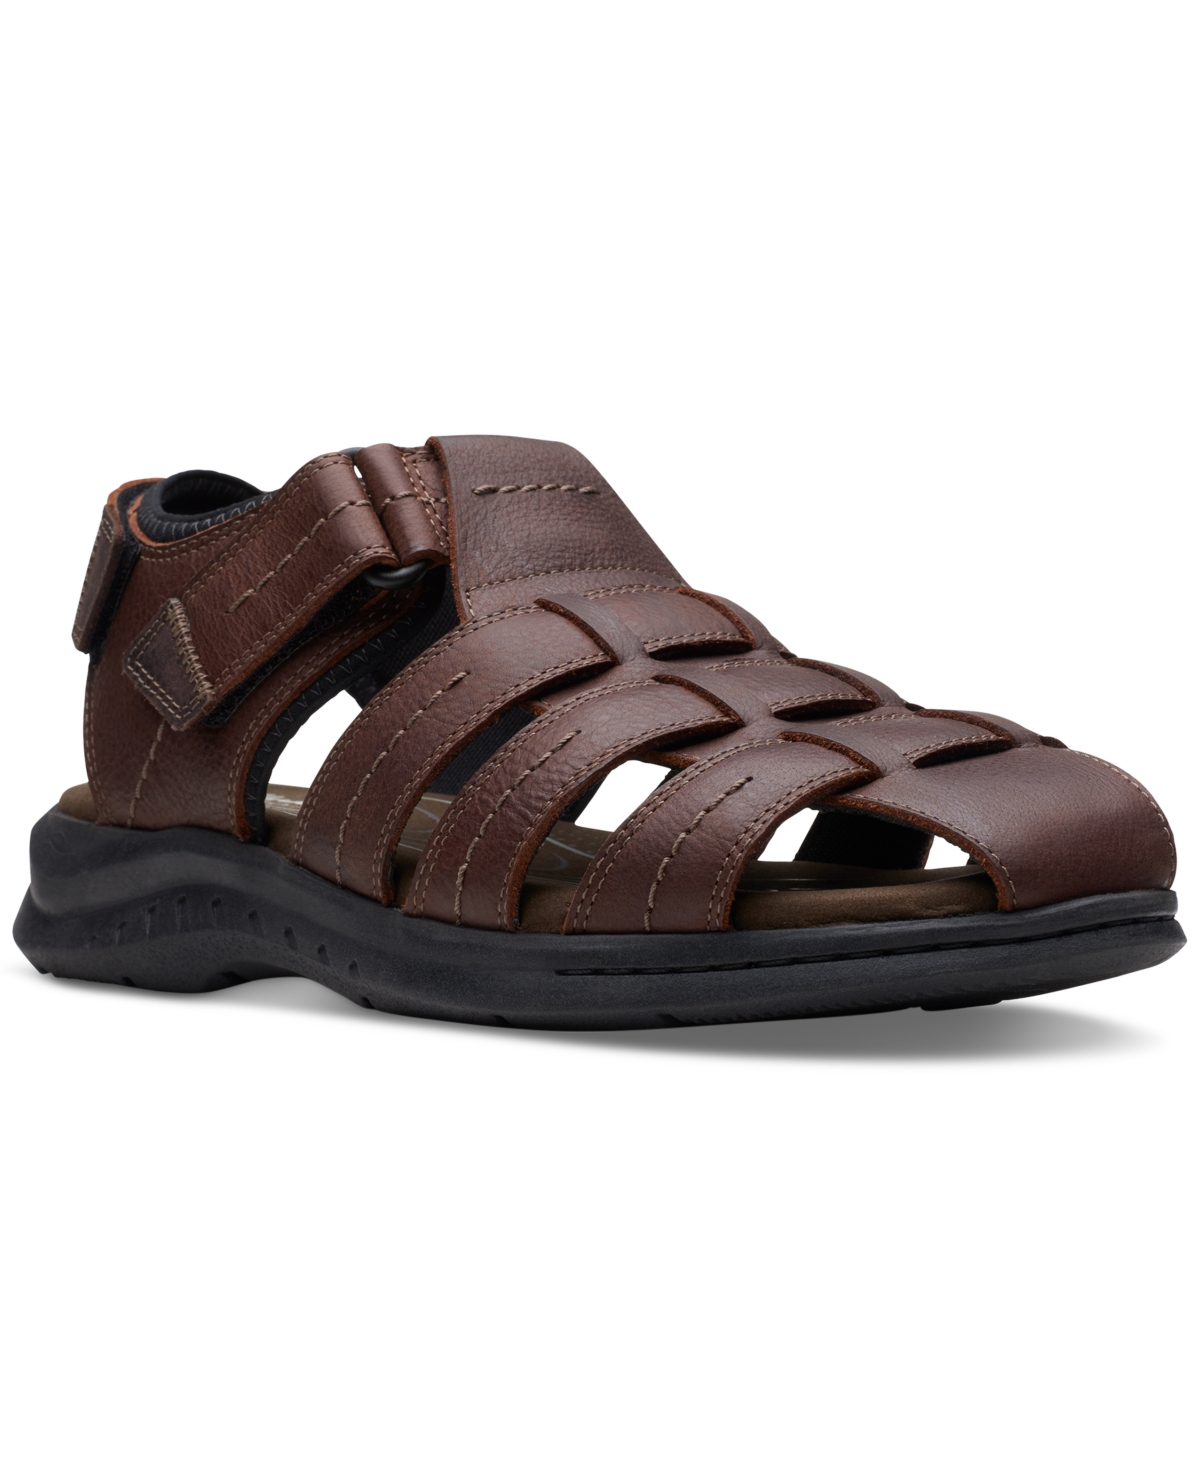 Clarks Men's Walkford Fish Tumbled Leather Sandals Men's Shoes